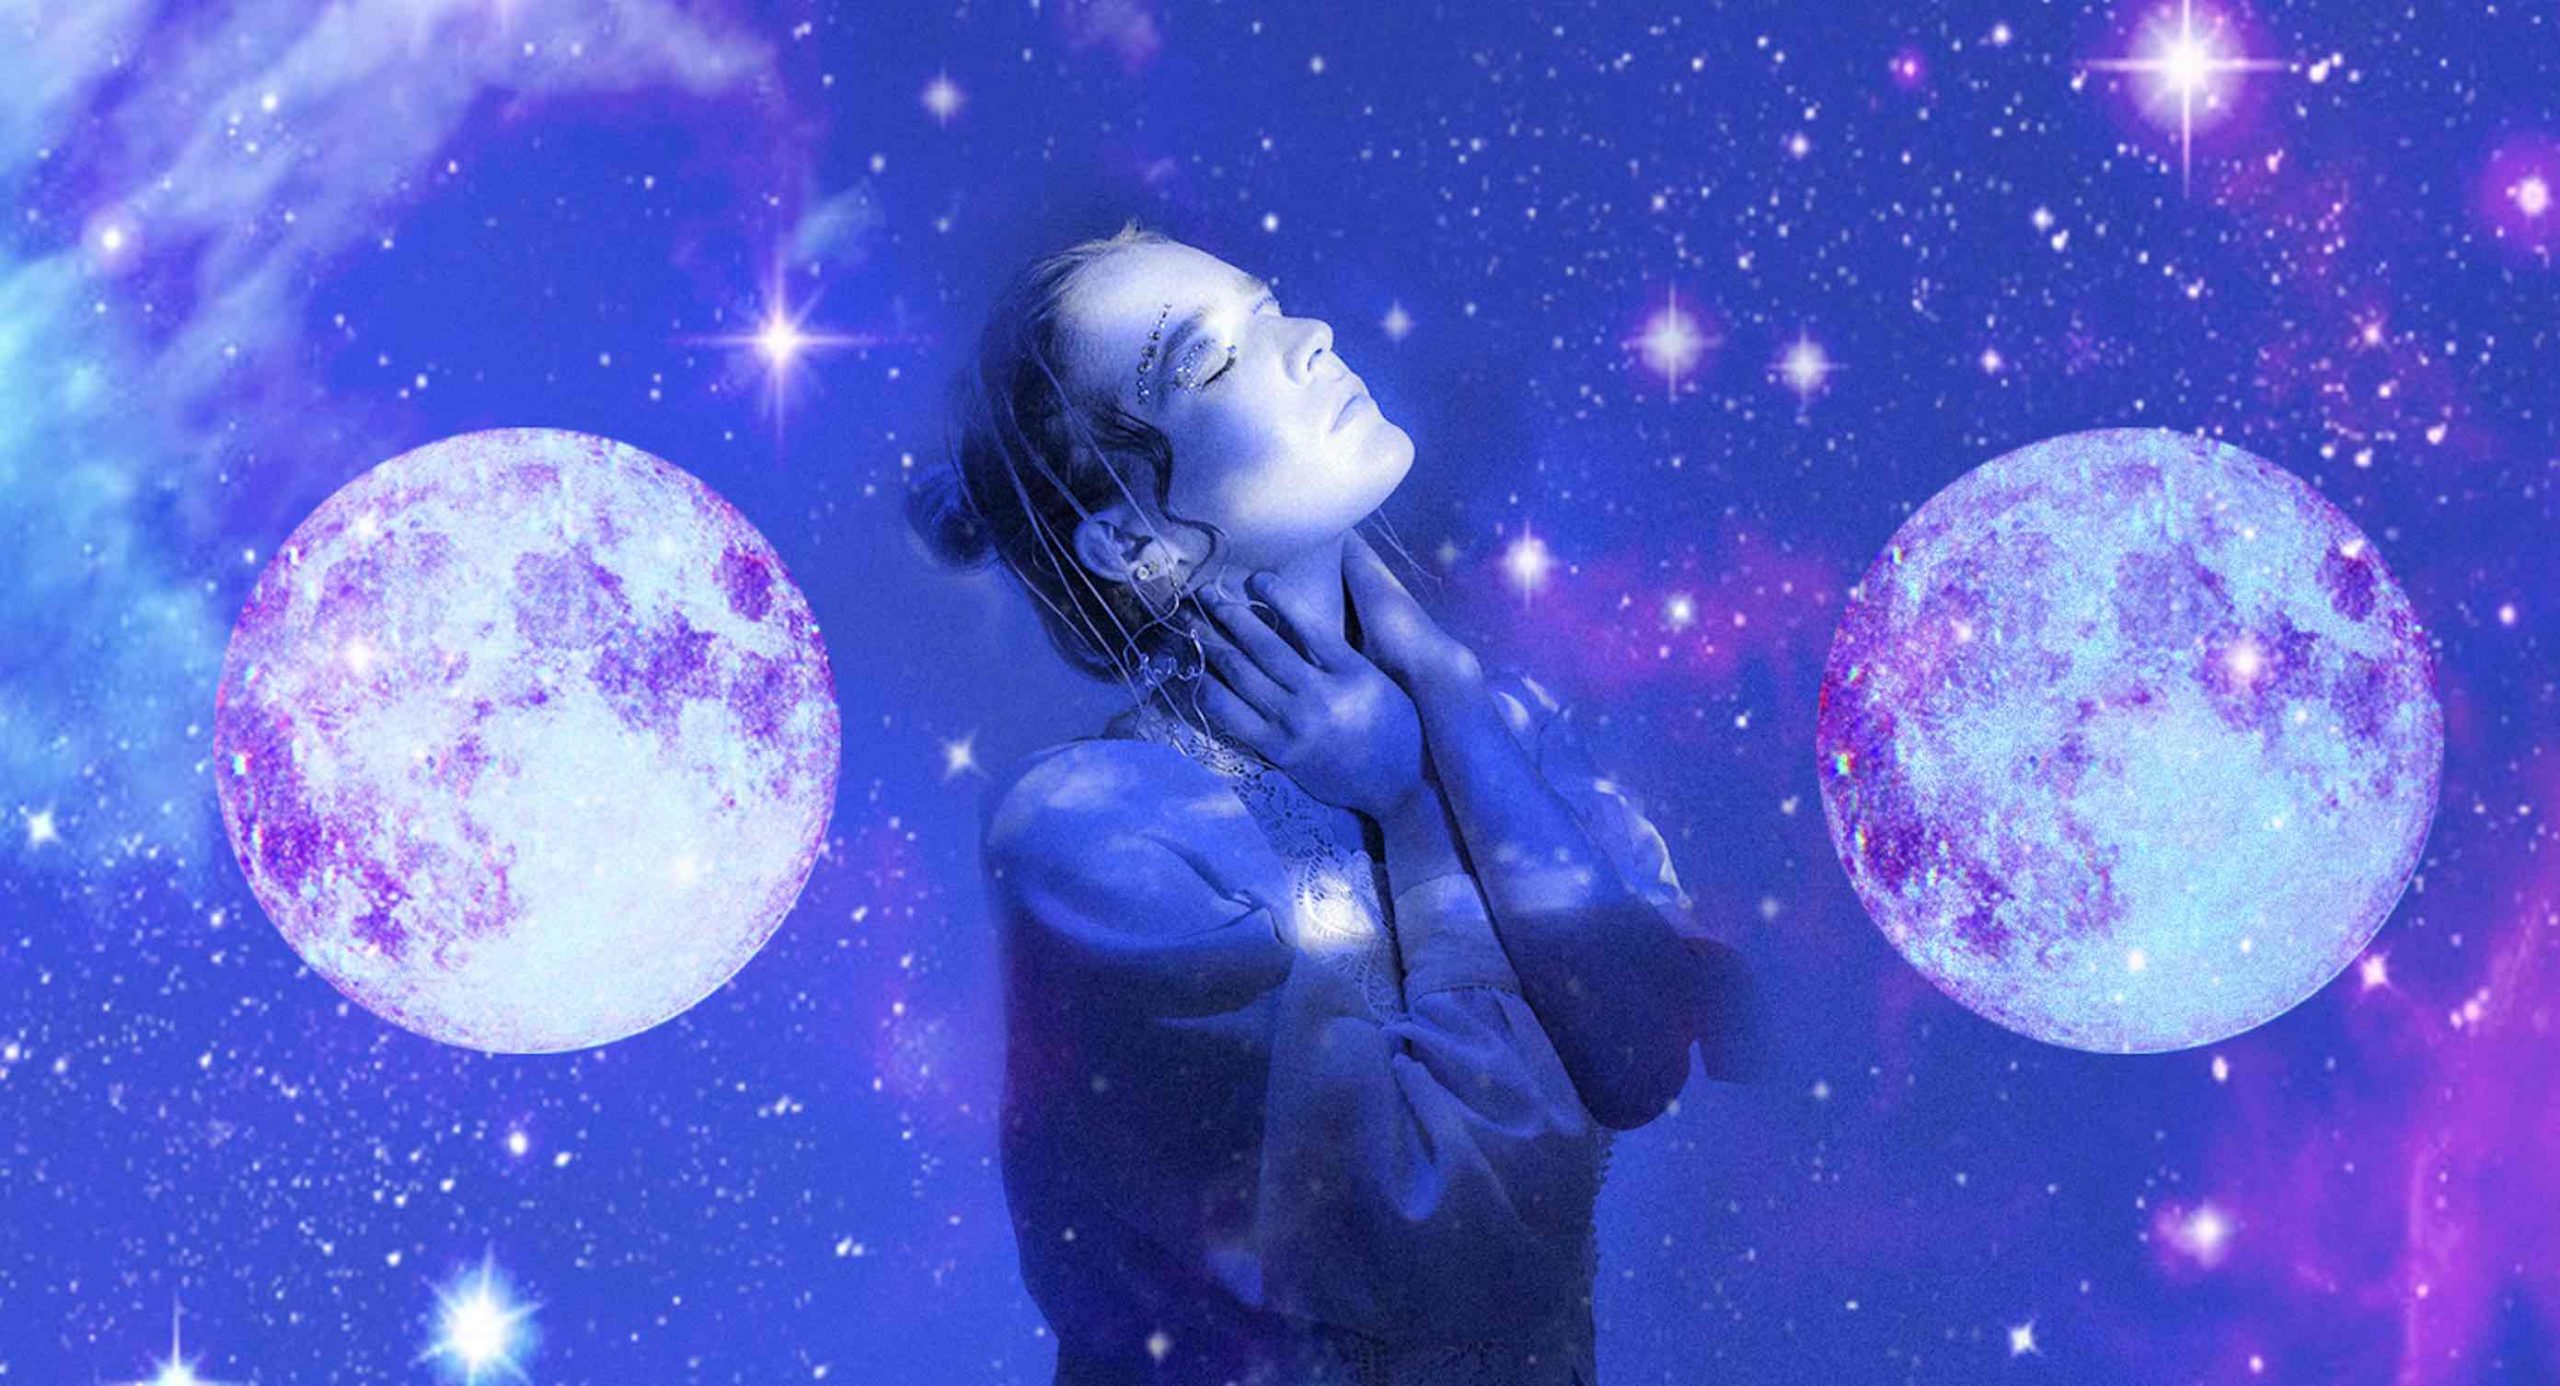 This Is Your Most Powerful Psychic Ability According to Your Moon Sign